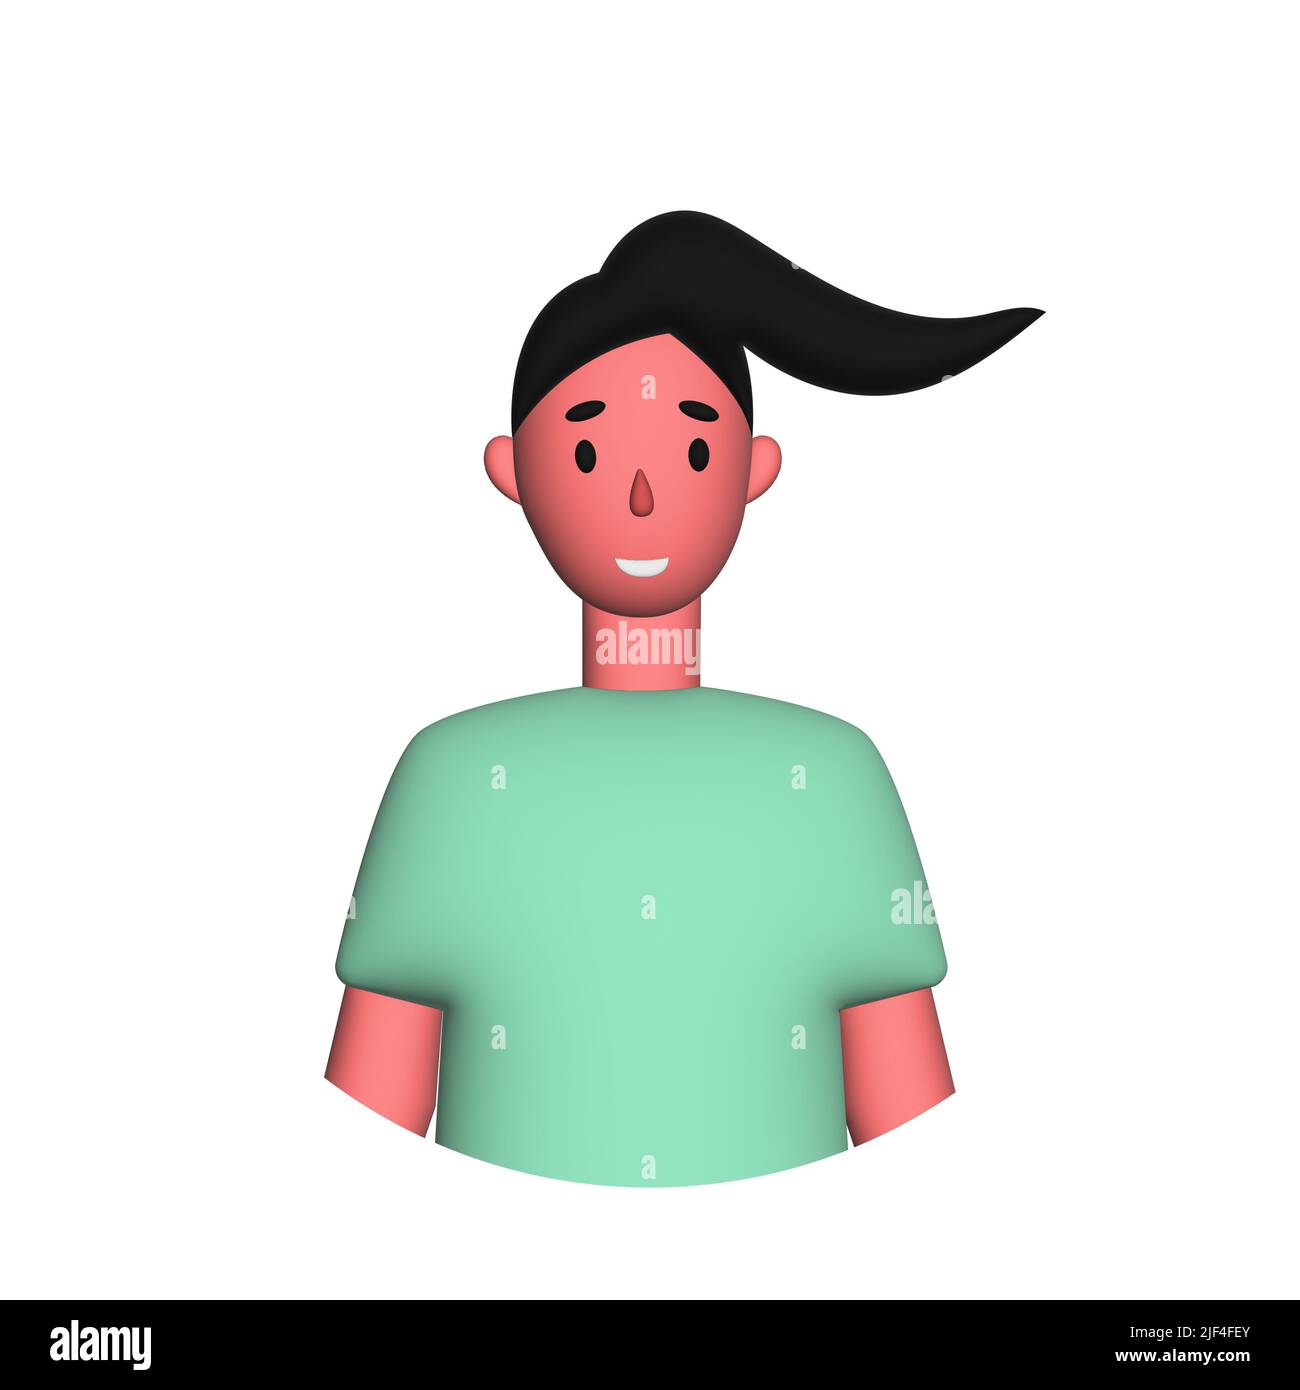 Web icon man, girl with a pigtail - illustration Stock Photo